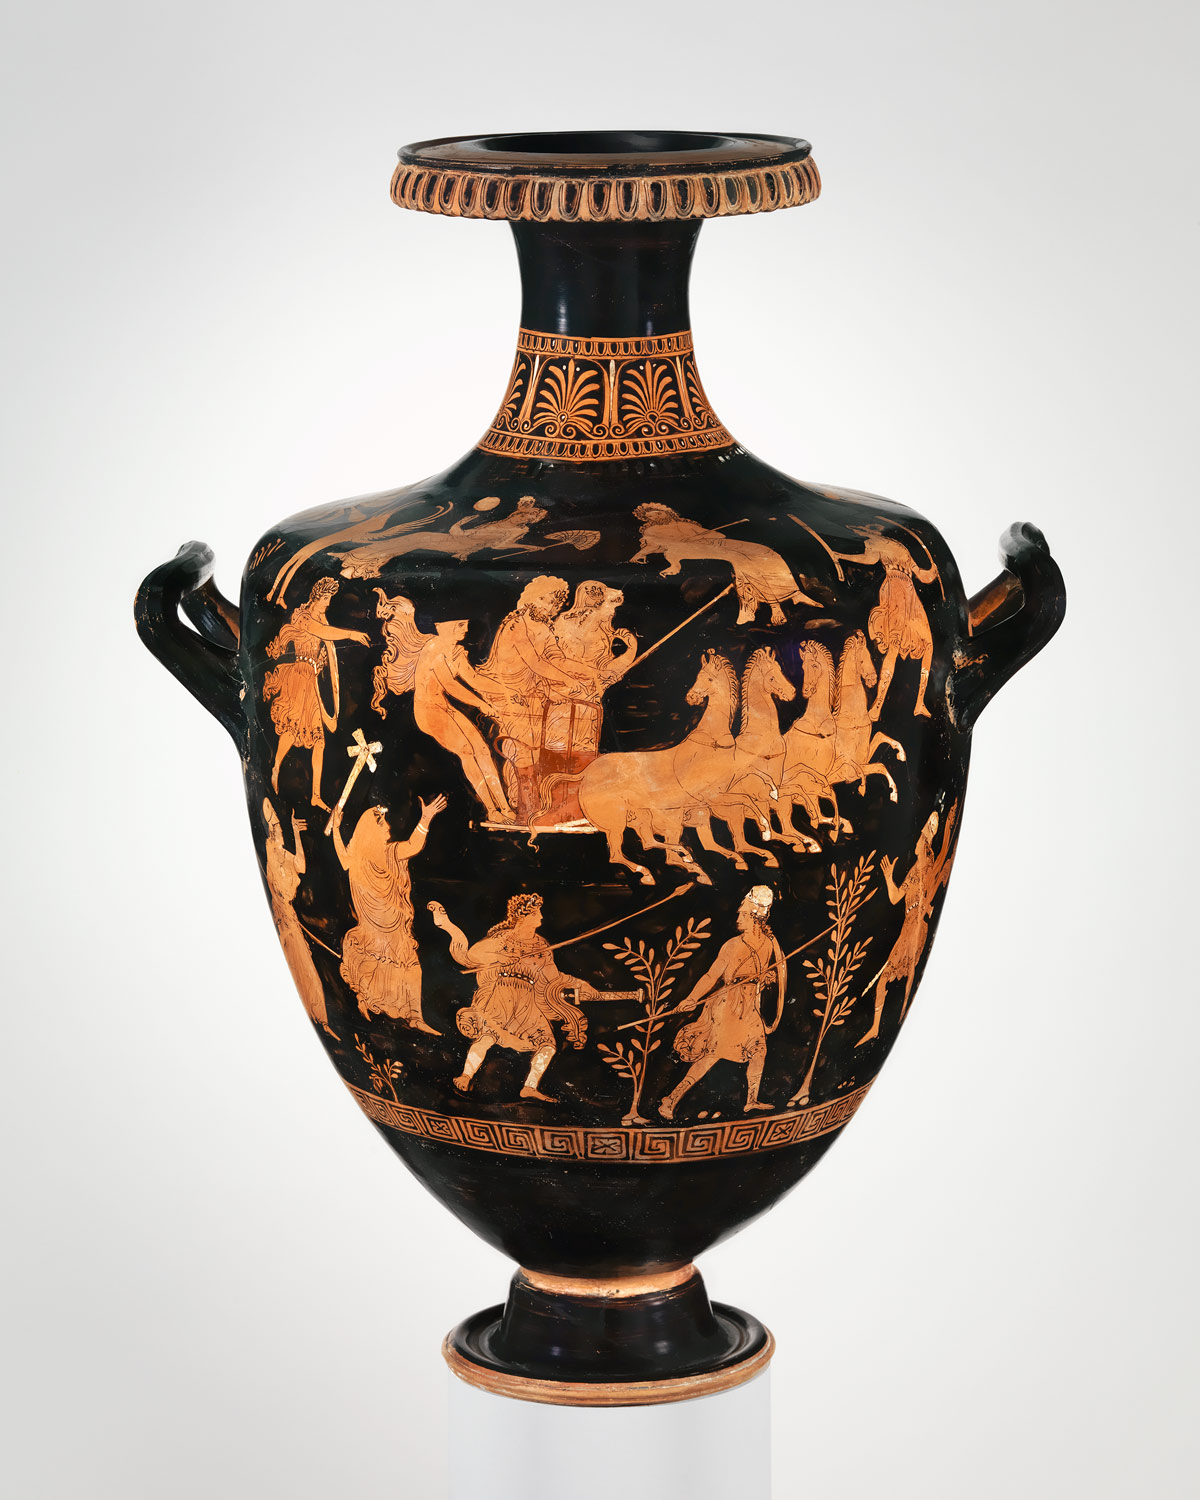 Ceramic Vase Hades with Persephone on Chariot Red Figure Hermes and Hecate 